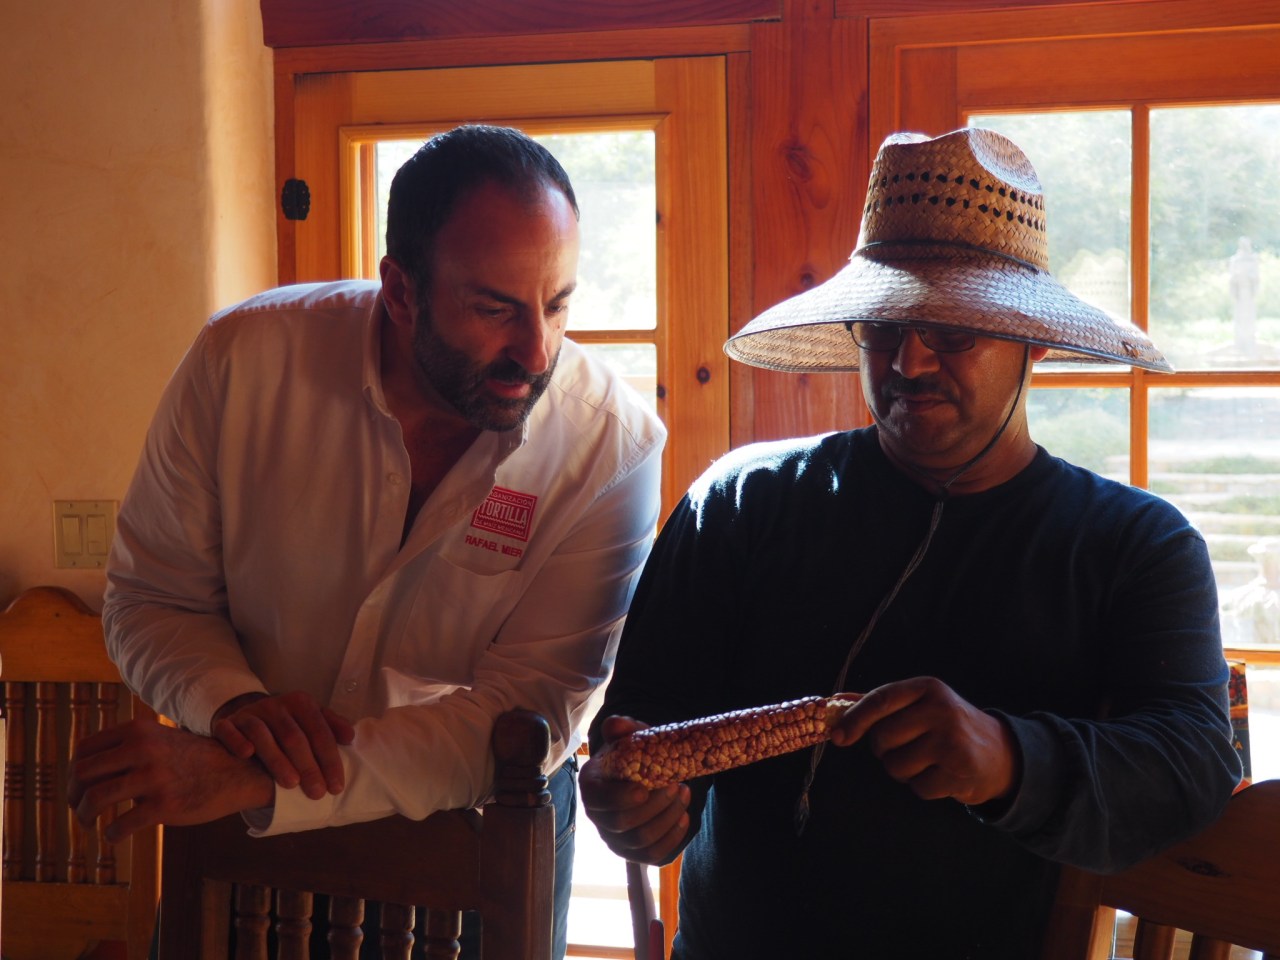 Rafael Mier showing an ear of corn to Salvador, the head farmer at Rancho la Puerta in Tecate, Mexico. (Photo by Jackie Bryant)